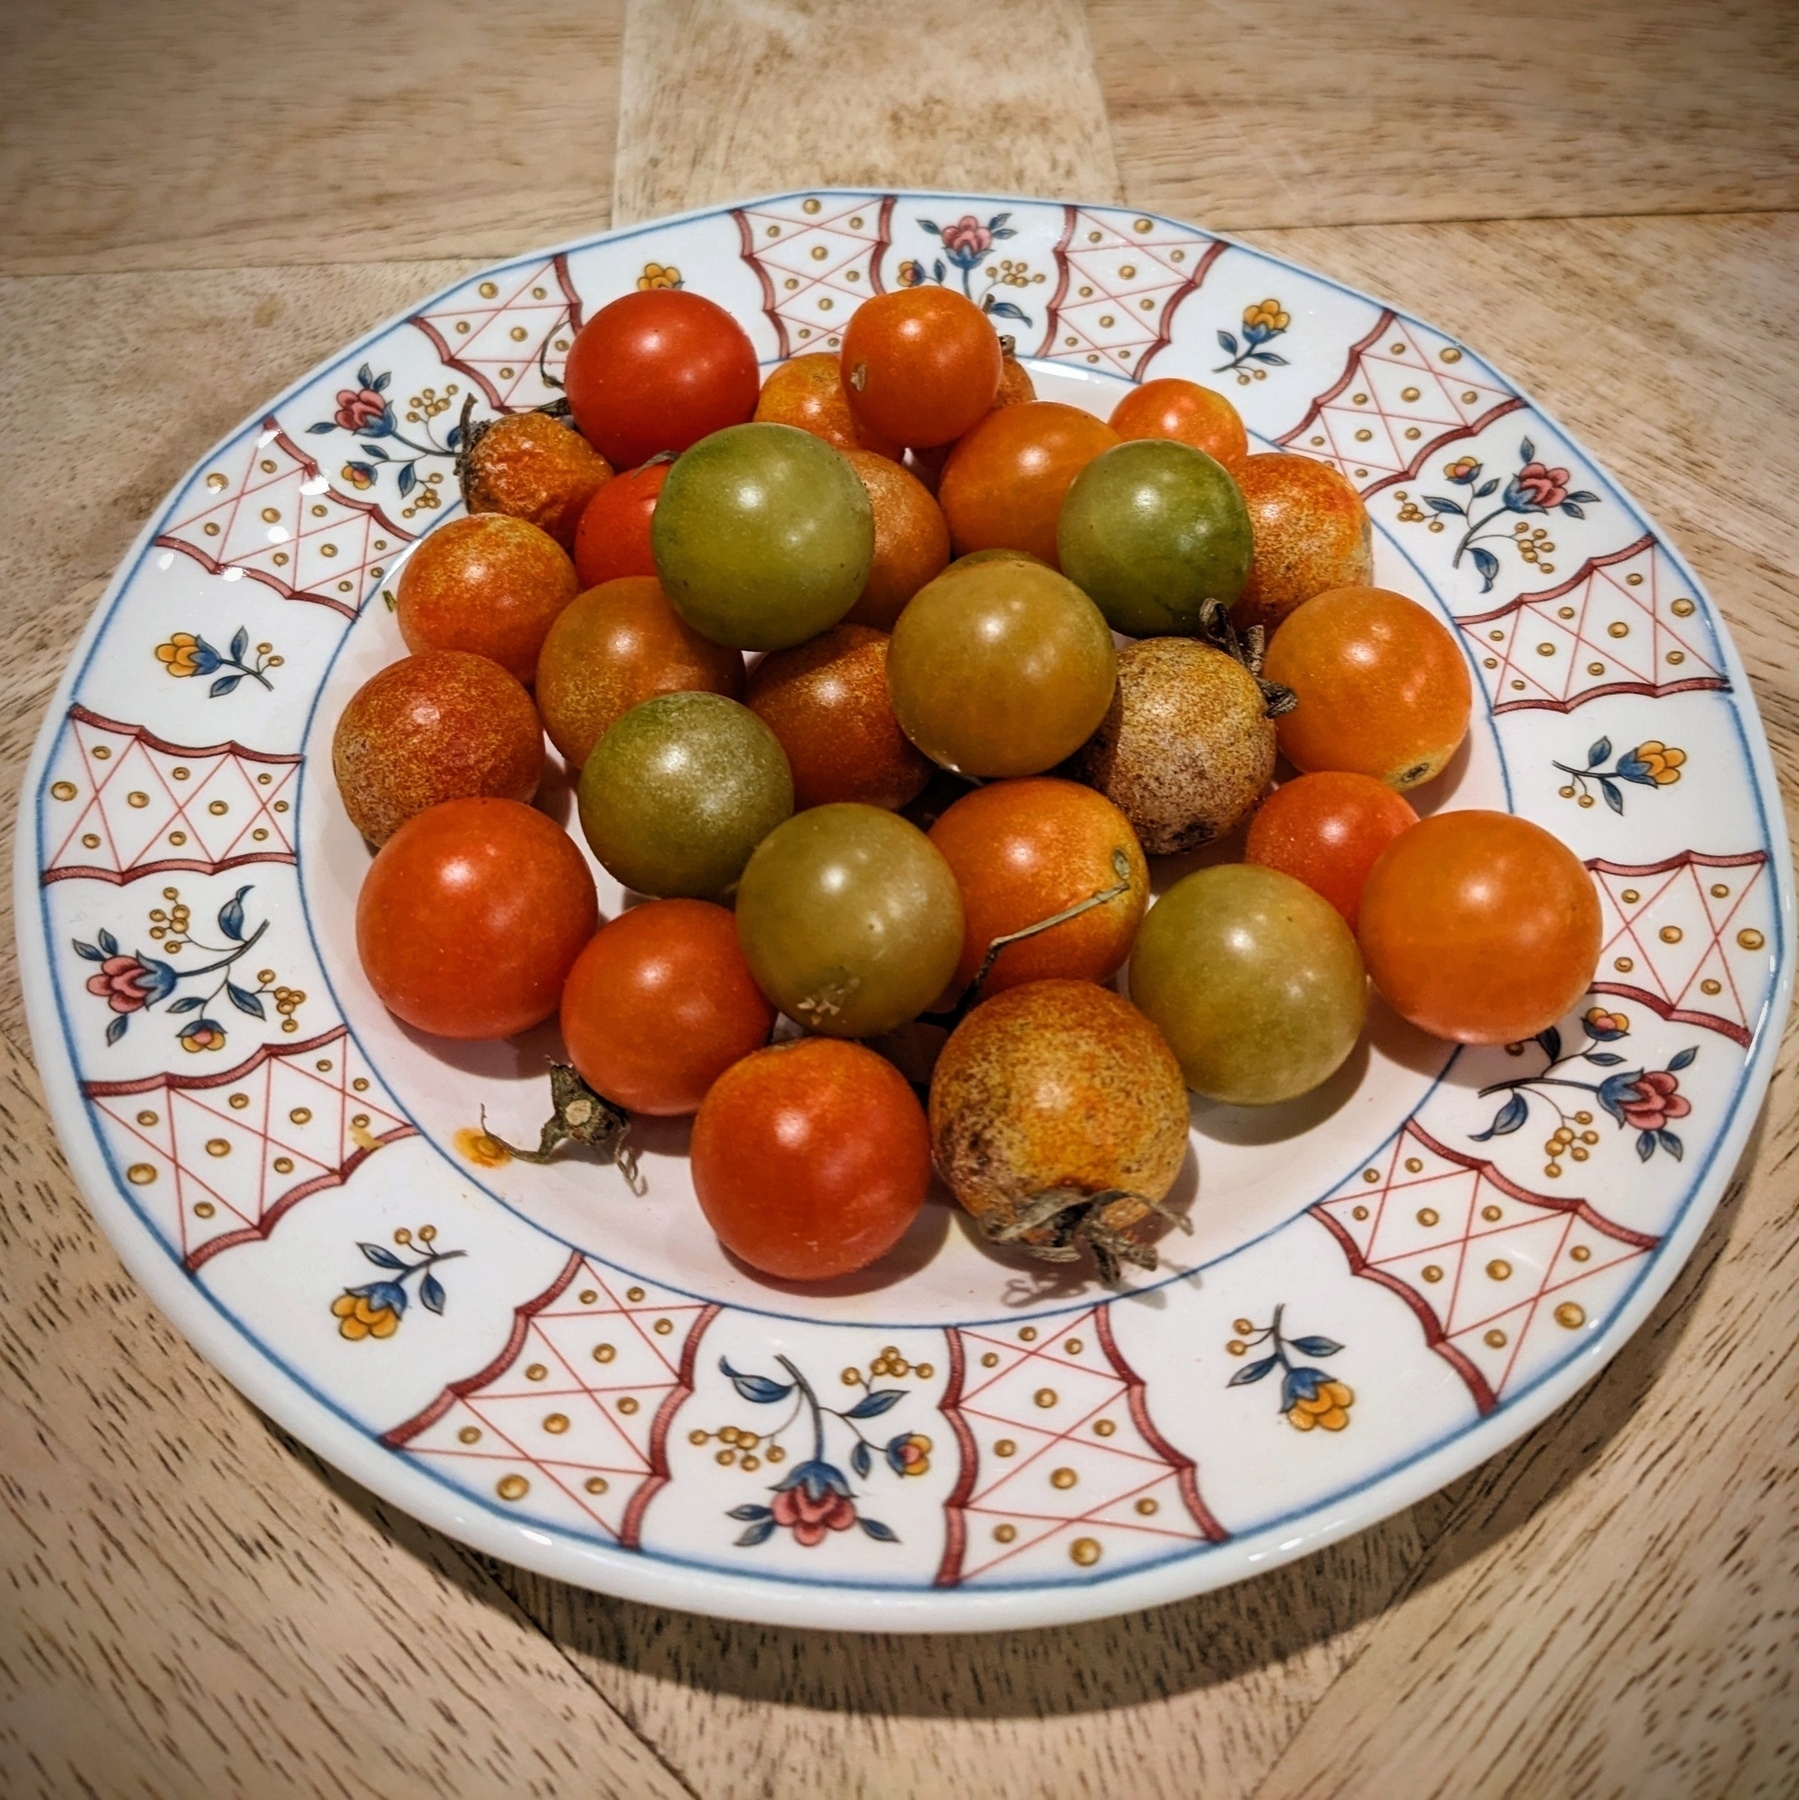 late season cherry tomatoes, red and green-going-to-red